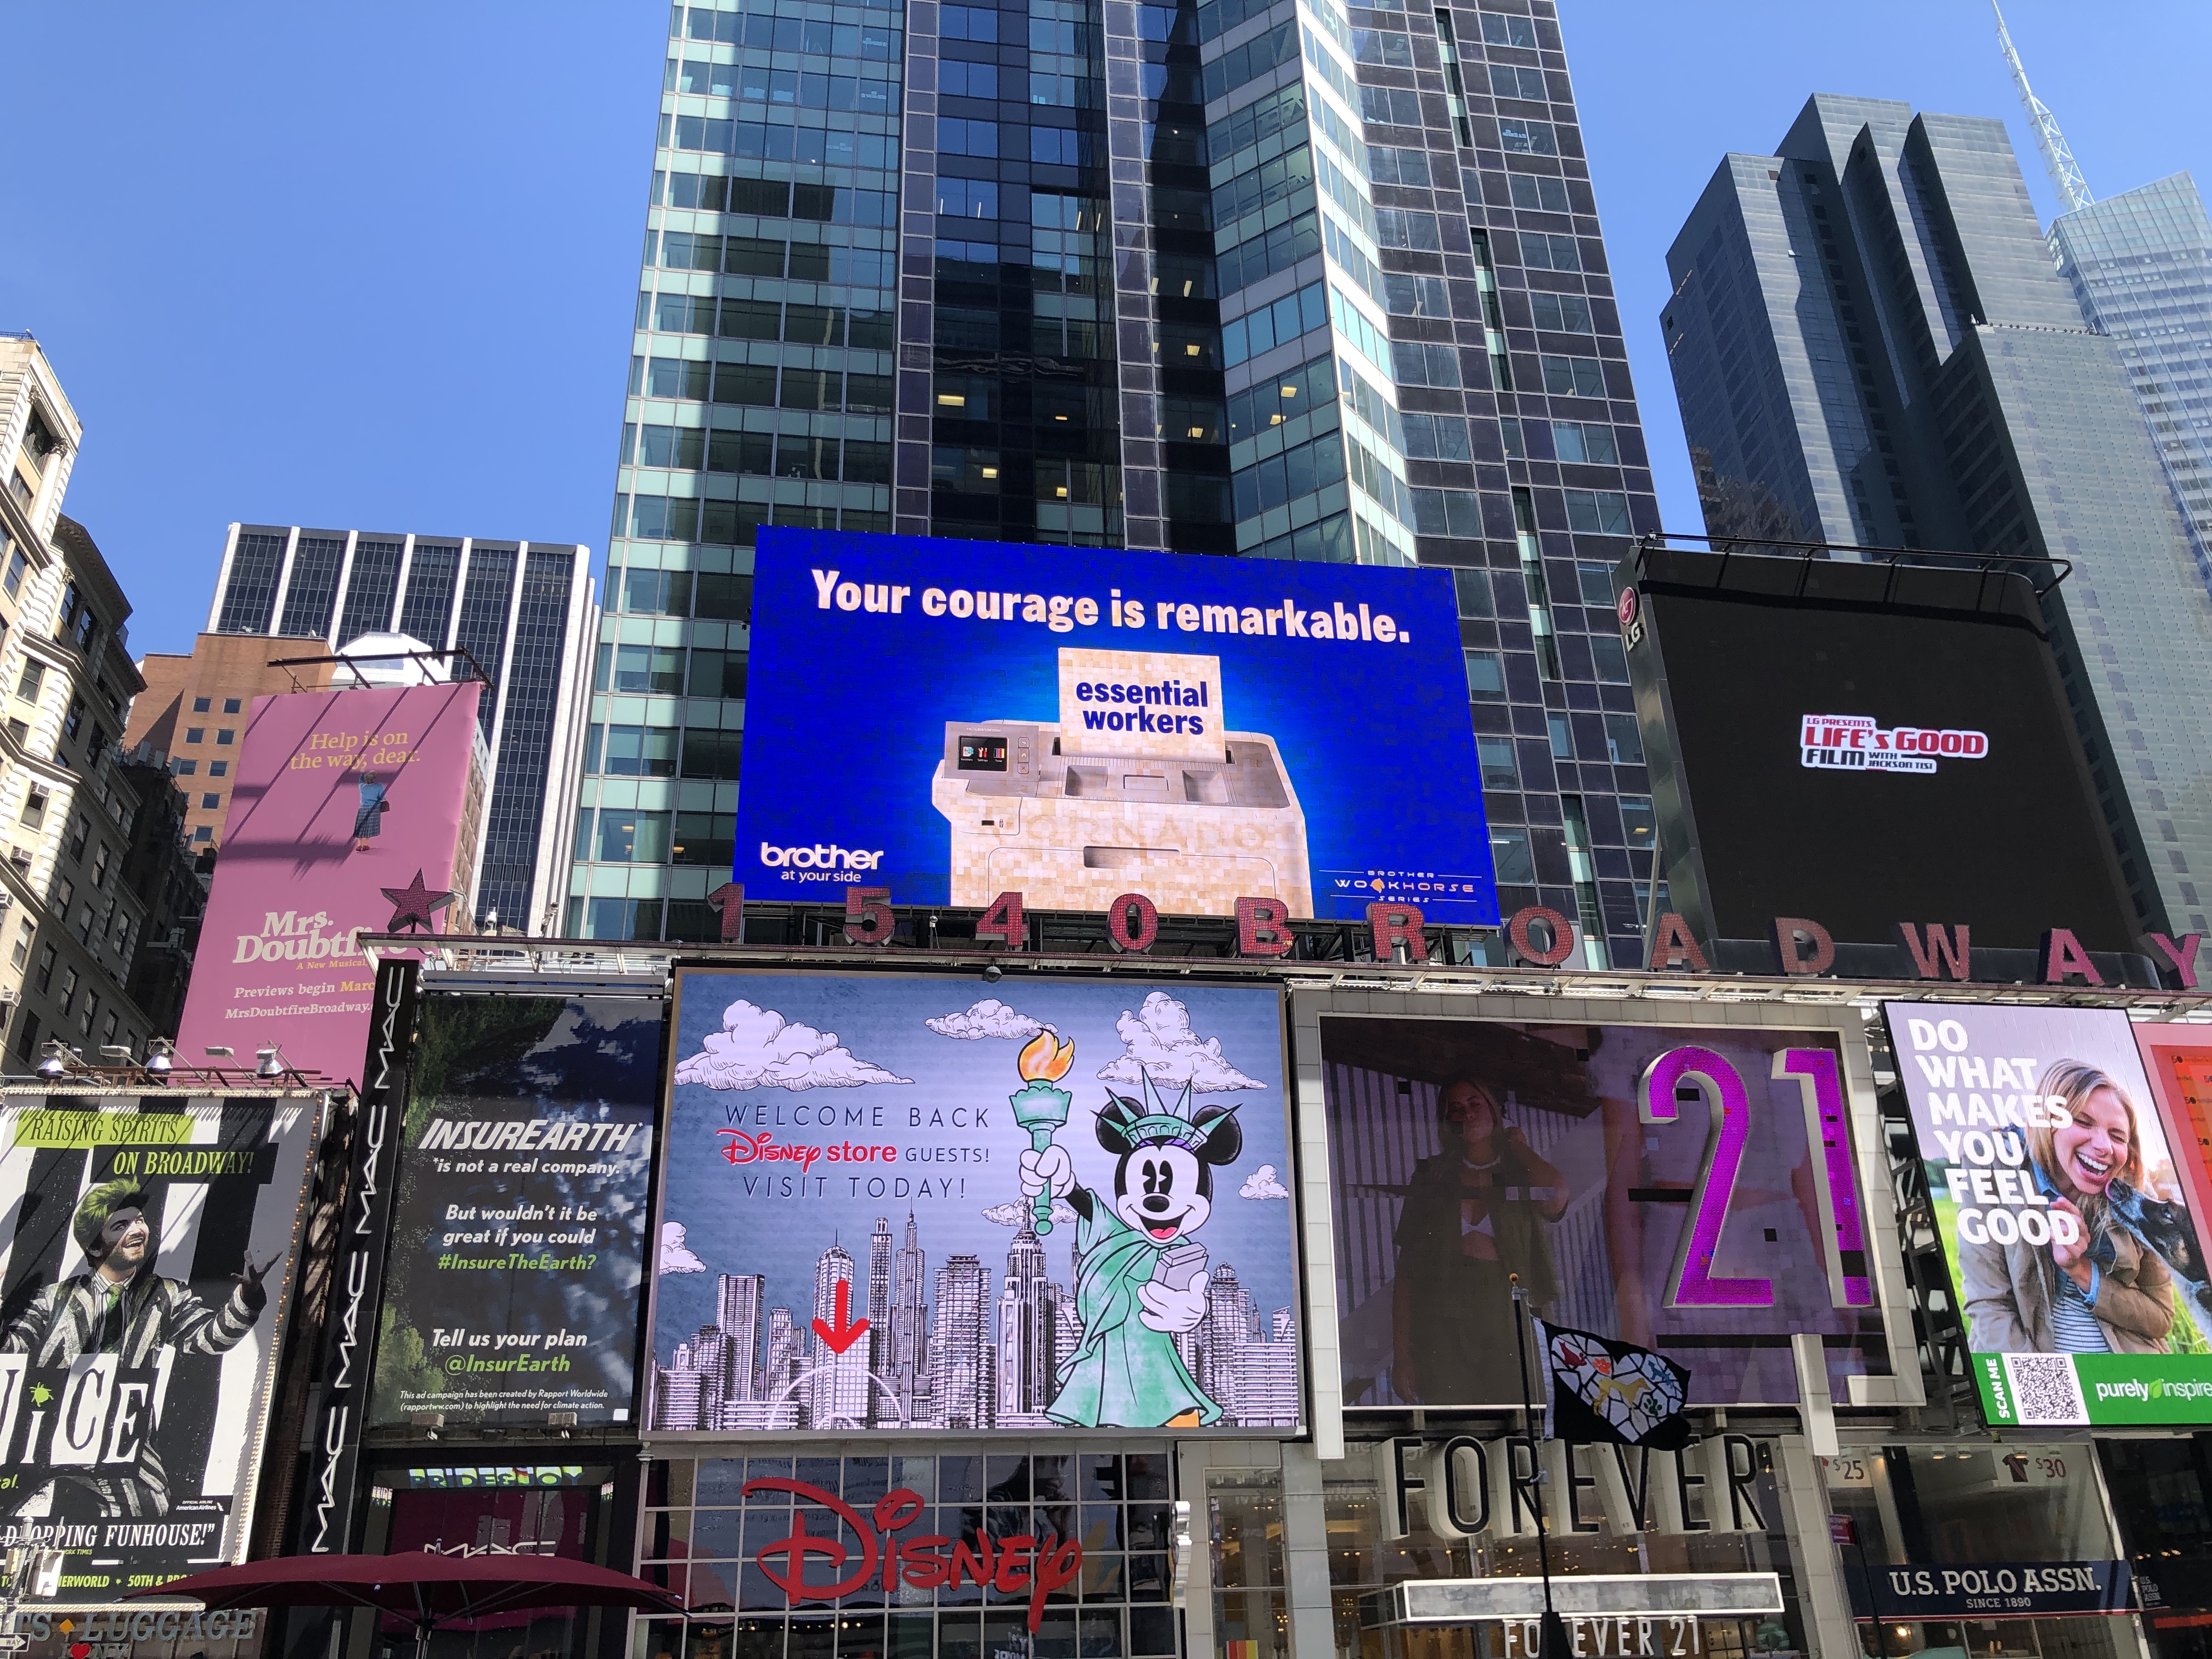 A billboard in Times Square dedicated to essential workers in 2021.